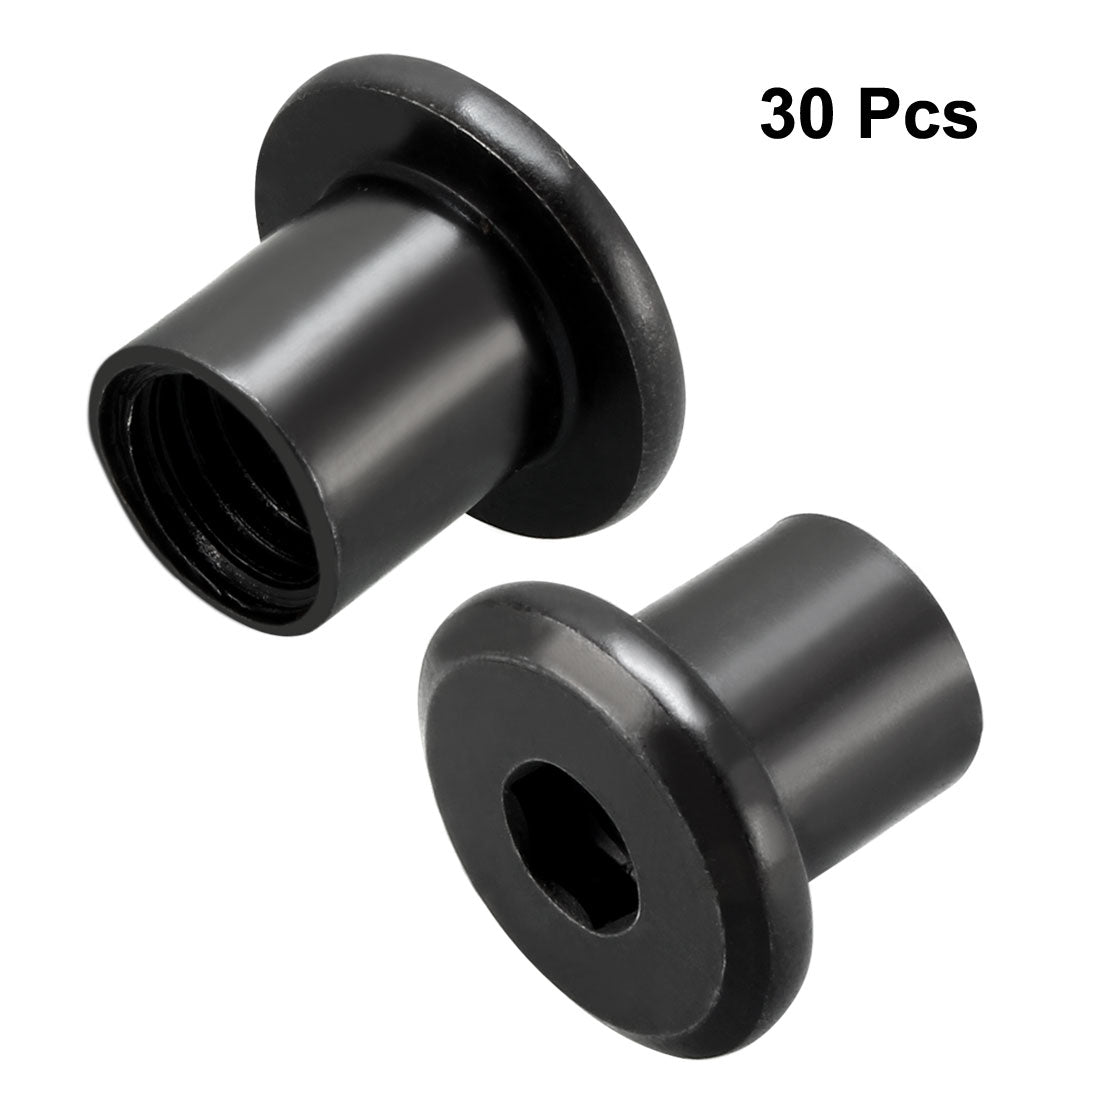 uxcell Uxcell M8x10mm Hex Socket Head Insert Nut Screw Post Sleeve Nut for Furniture 30pcs